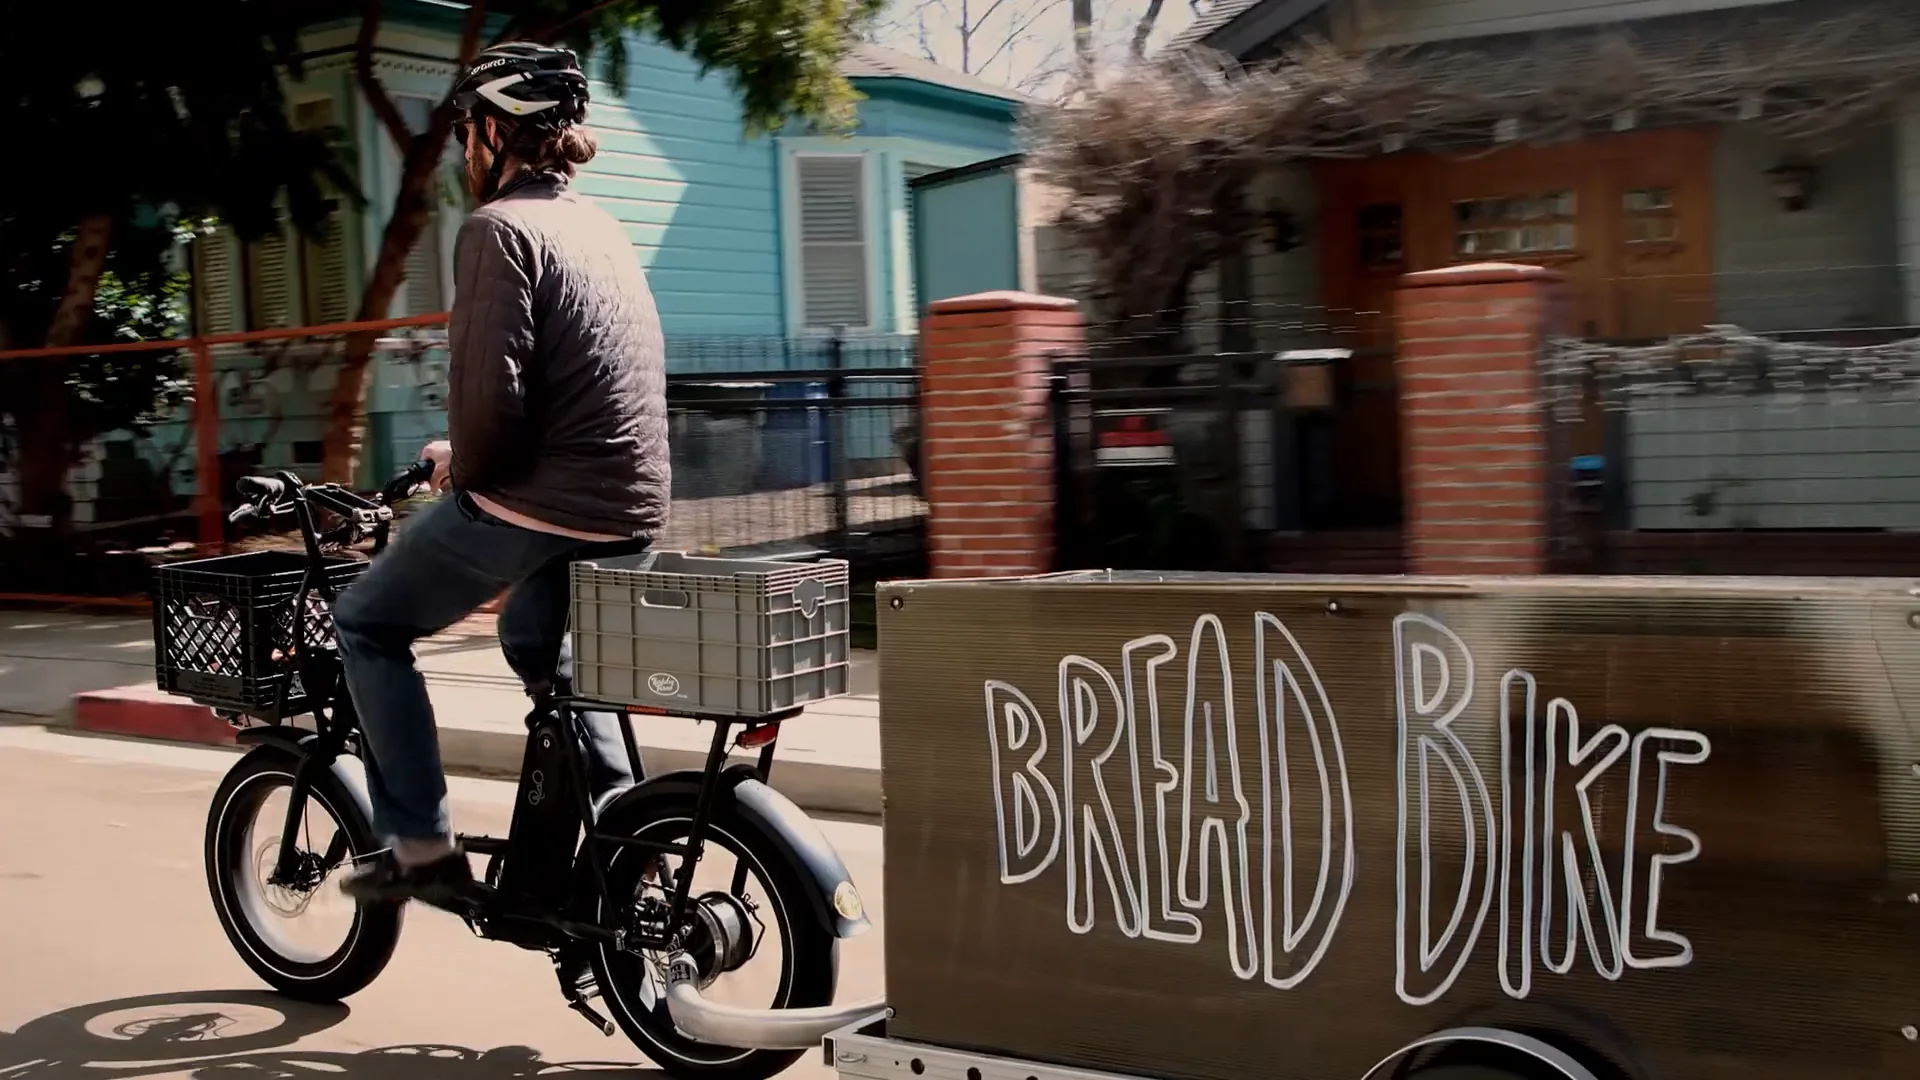 BREAD: AN EVERYDAY MIRACLE (Official Trailer) on Vimeo